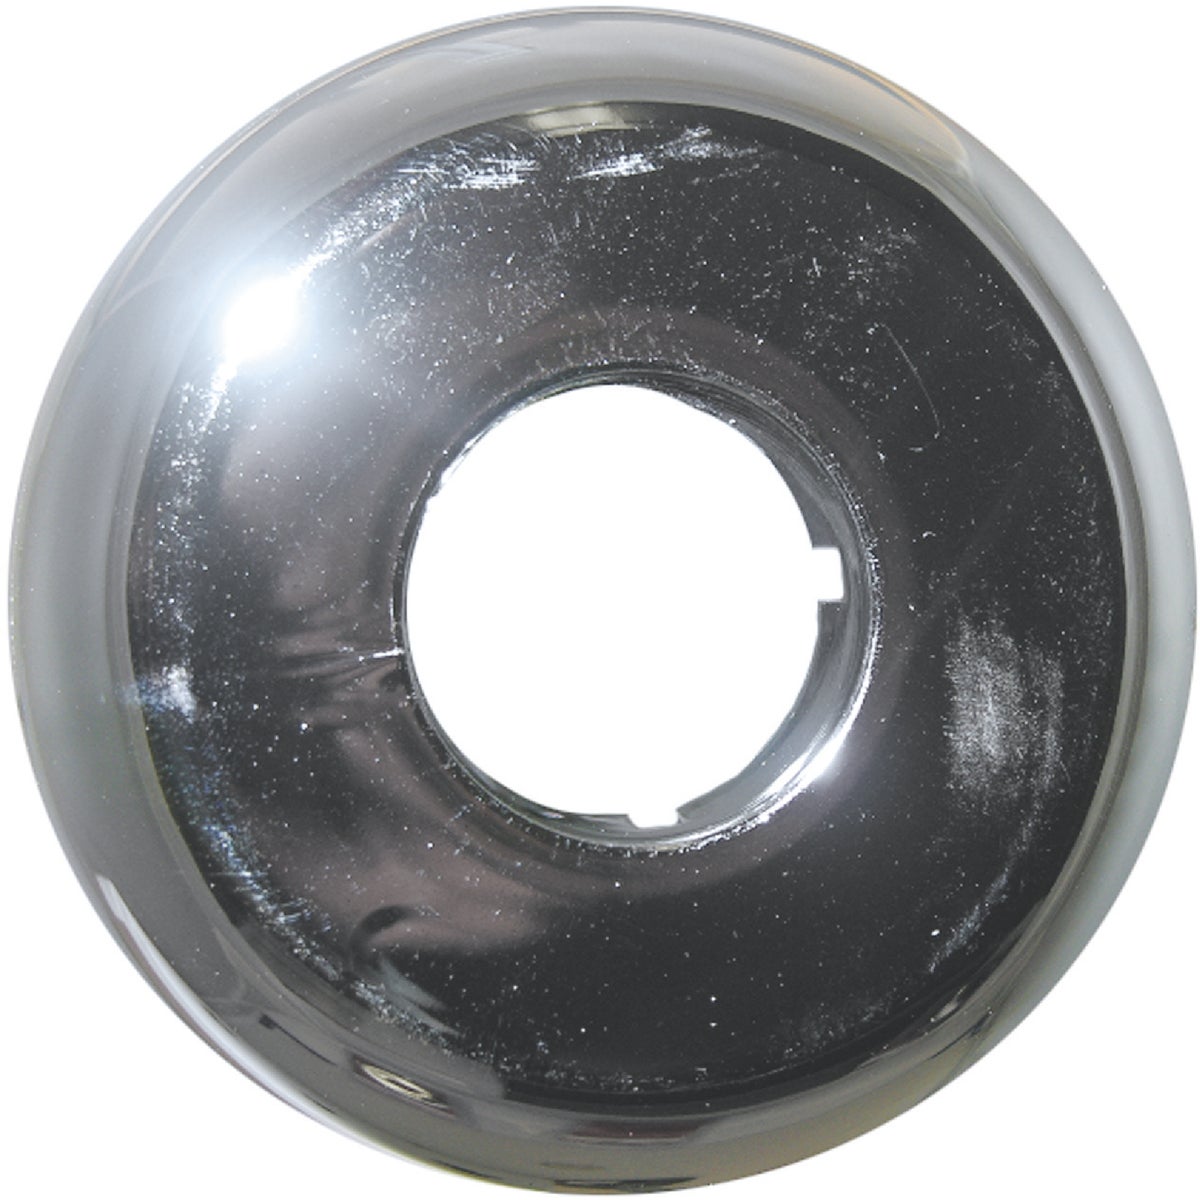 Lasco Chrome-Plated 3/4 In. IP or 1 In. ID Split Plate